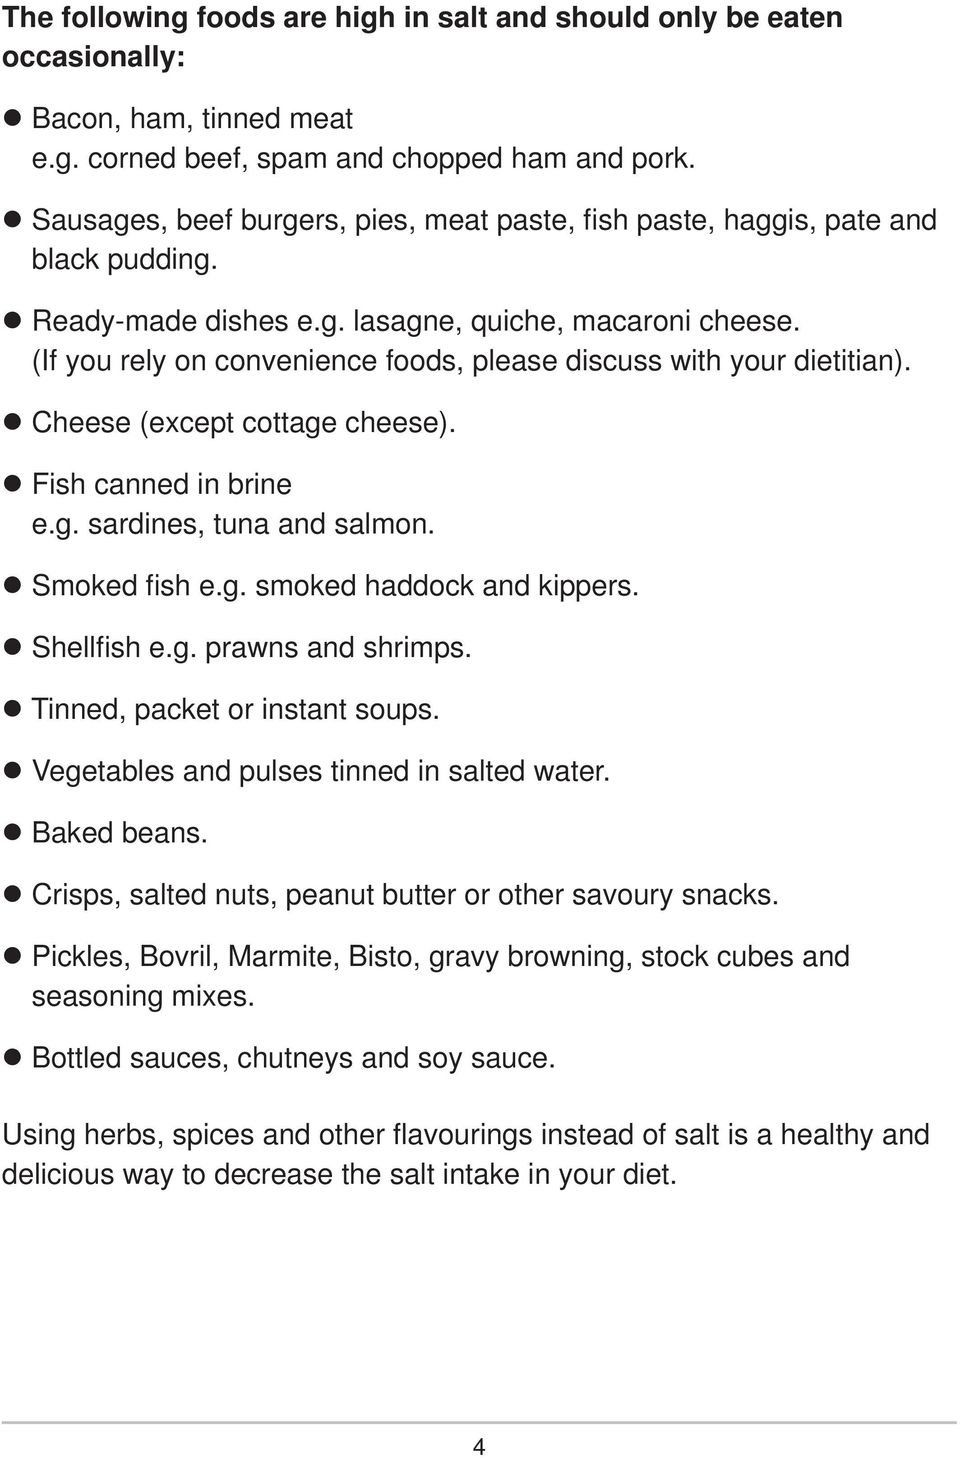 (If you rely on convenience foods, please discuss with your dietitian). Cheese (except cottage cheese). Fish canned in brine e.g. sardines, tuna and salmon. Smoked fi sh e.g. smoked haddock and kippers.